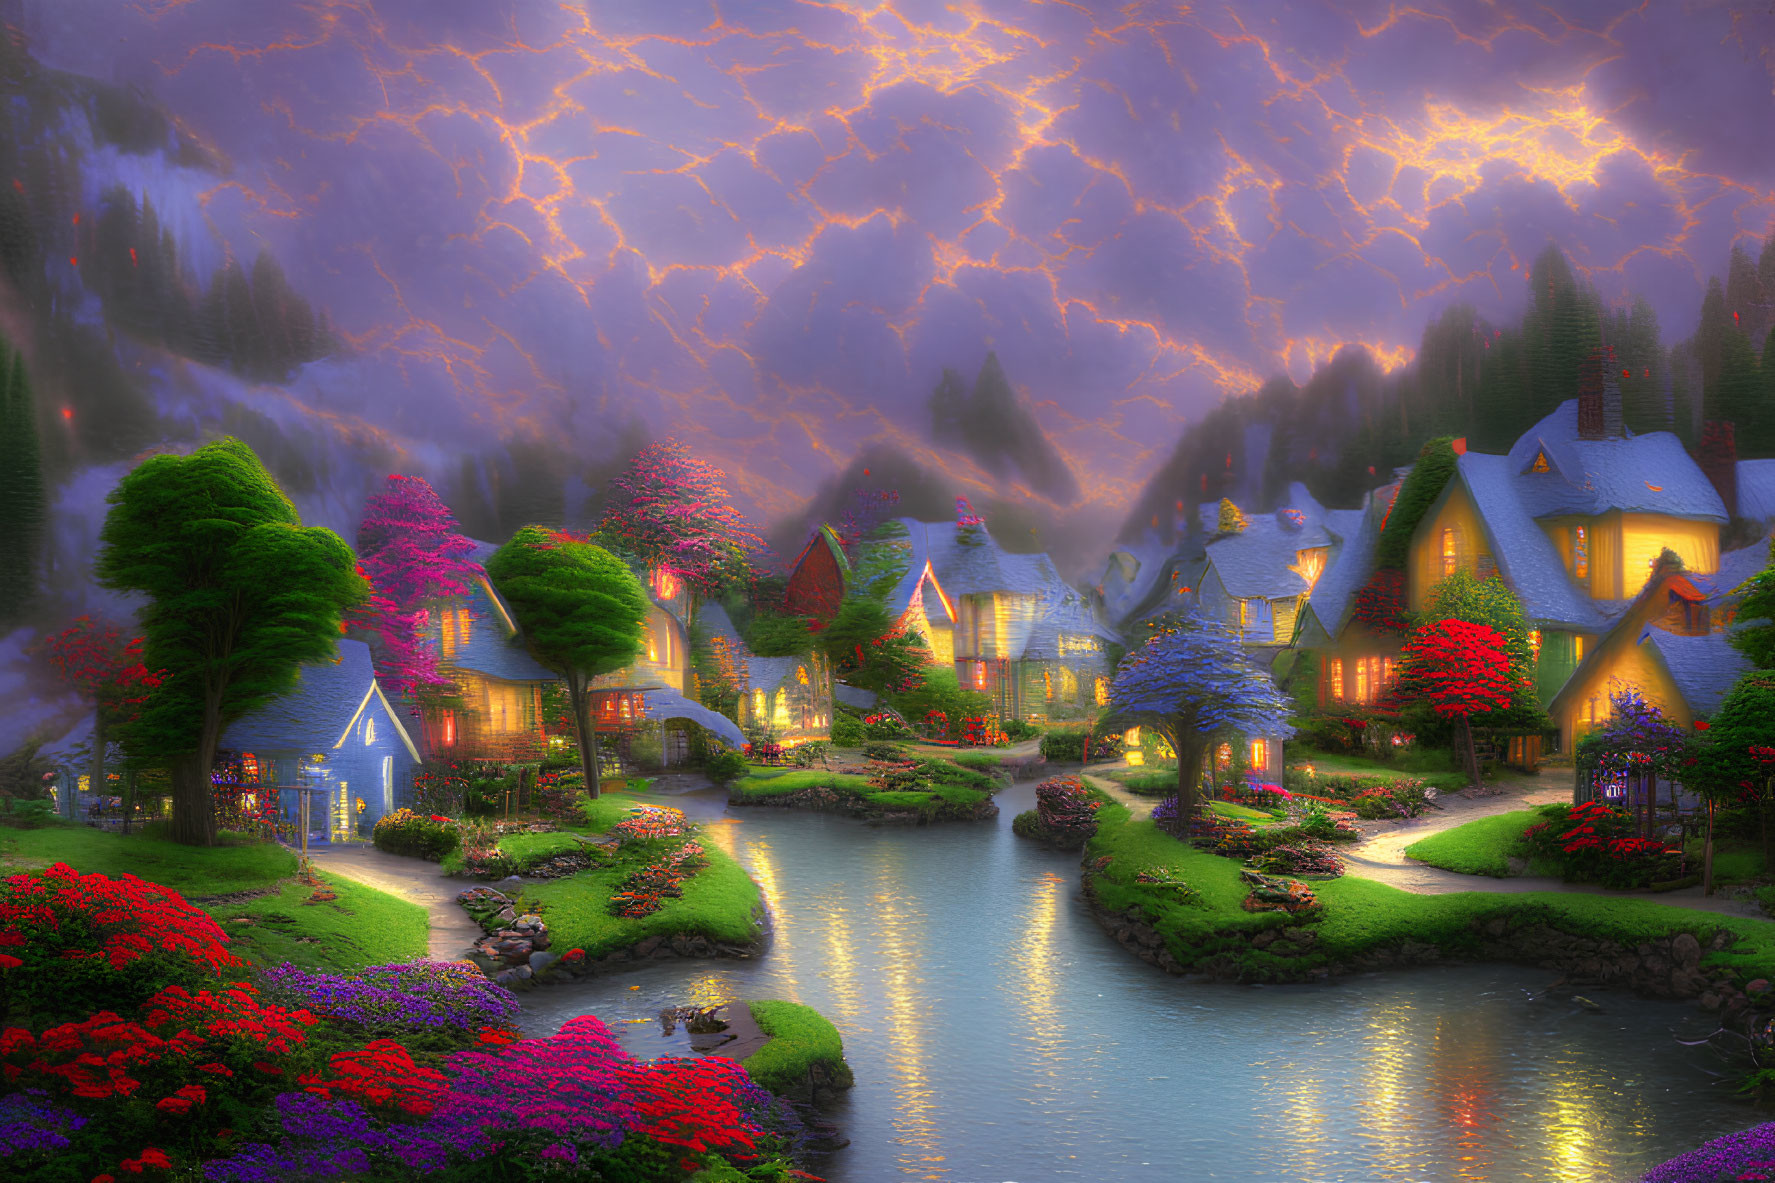 Idyllic village with cozy cottages, lush gardens, river, twilight sky